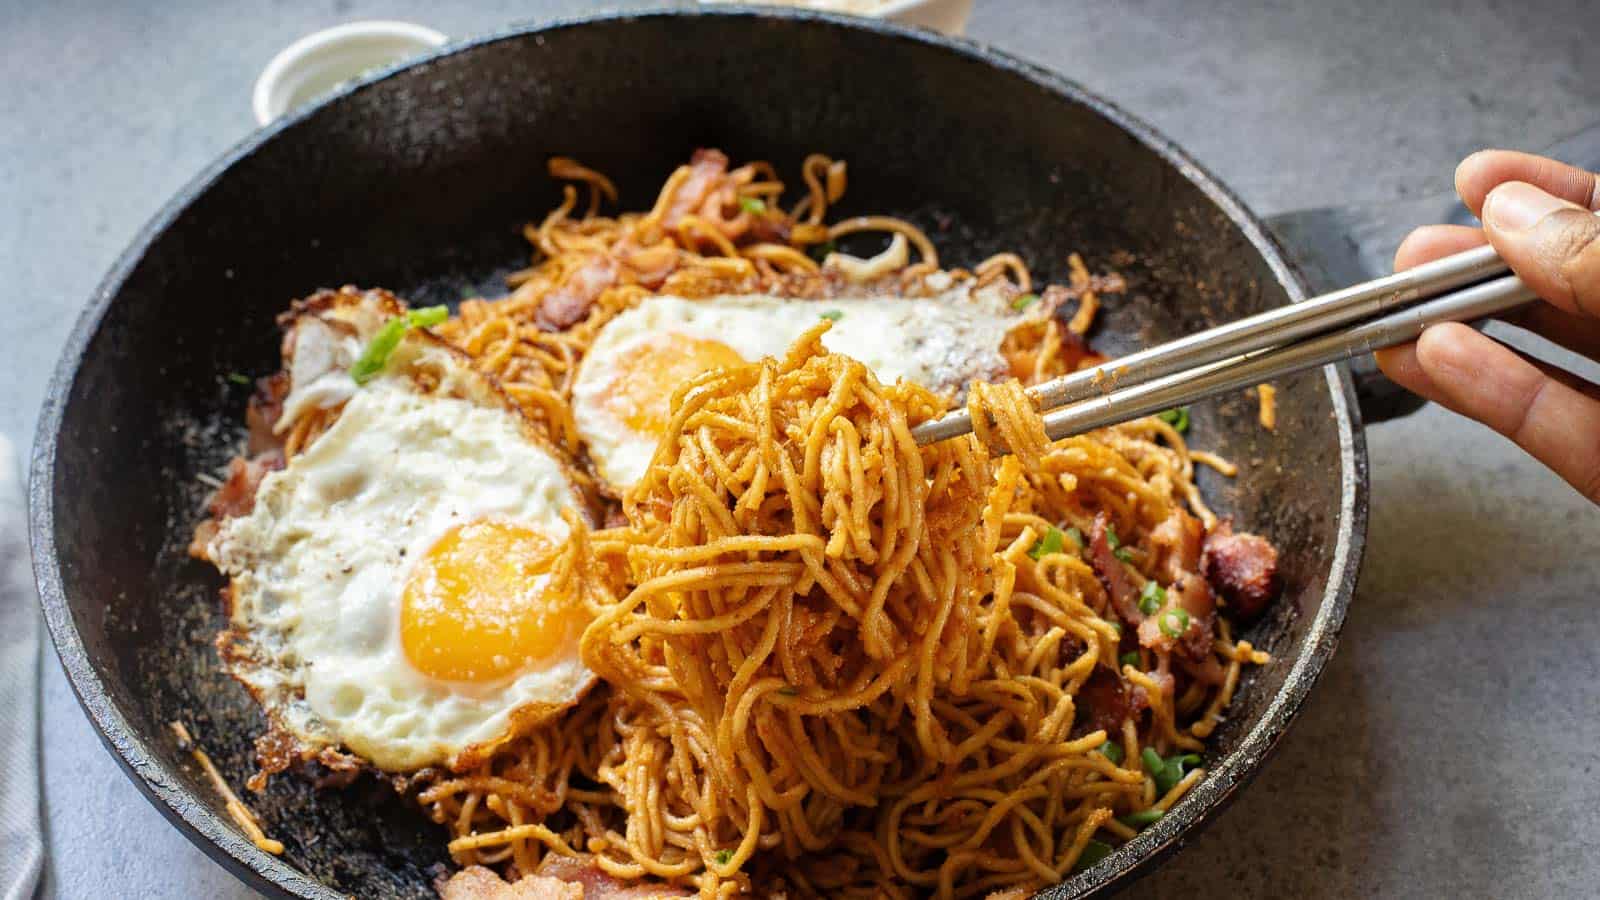 A person uses chopsticks to lift a portion of Gochujang noodles with crispy bacon and two sunny-side-up eggs from a skillet.